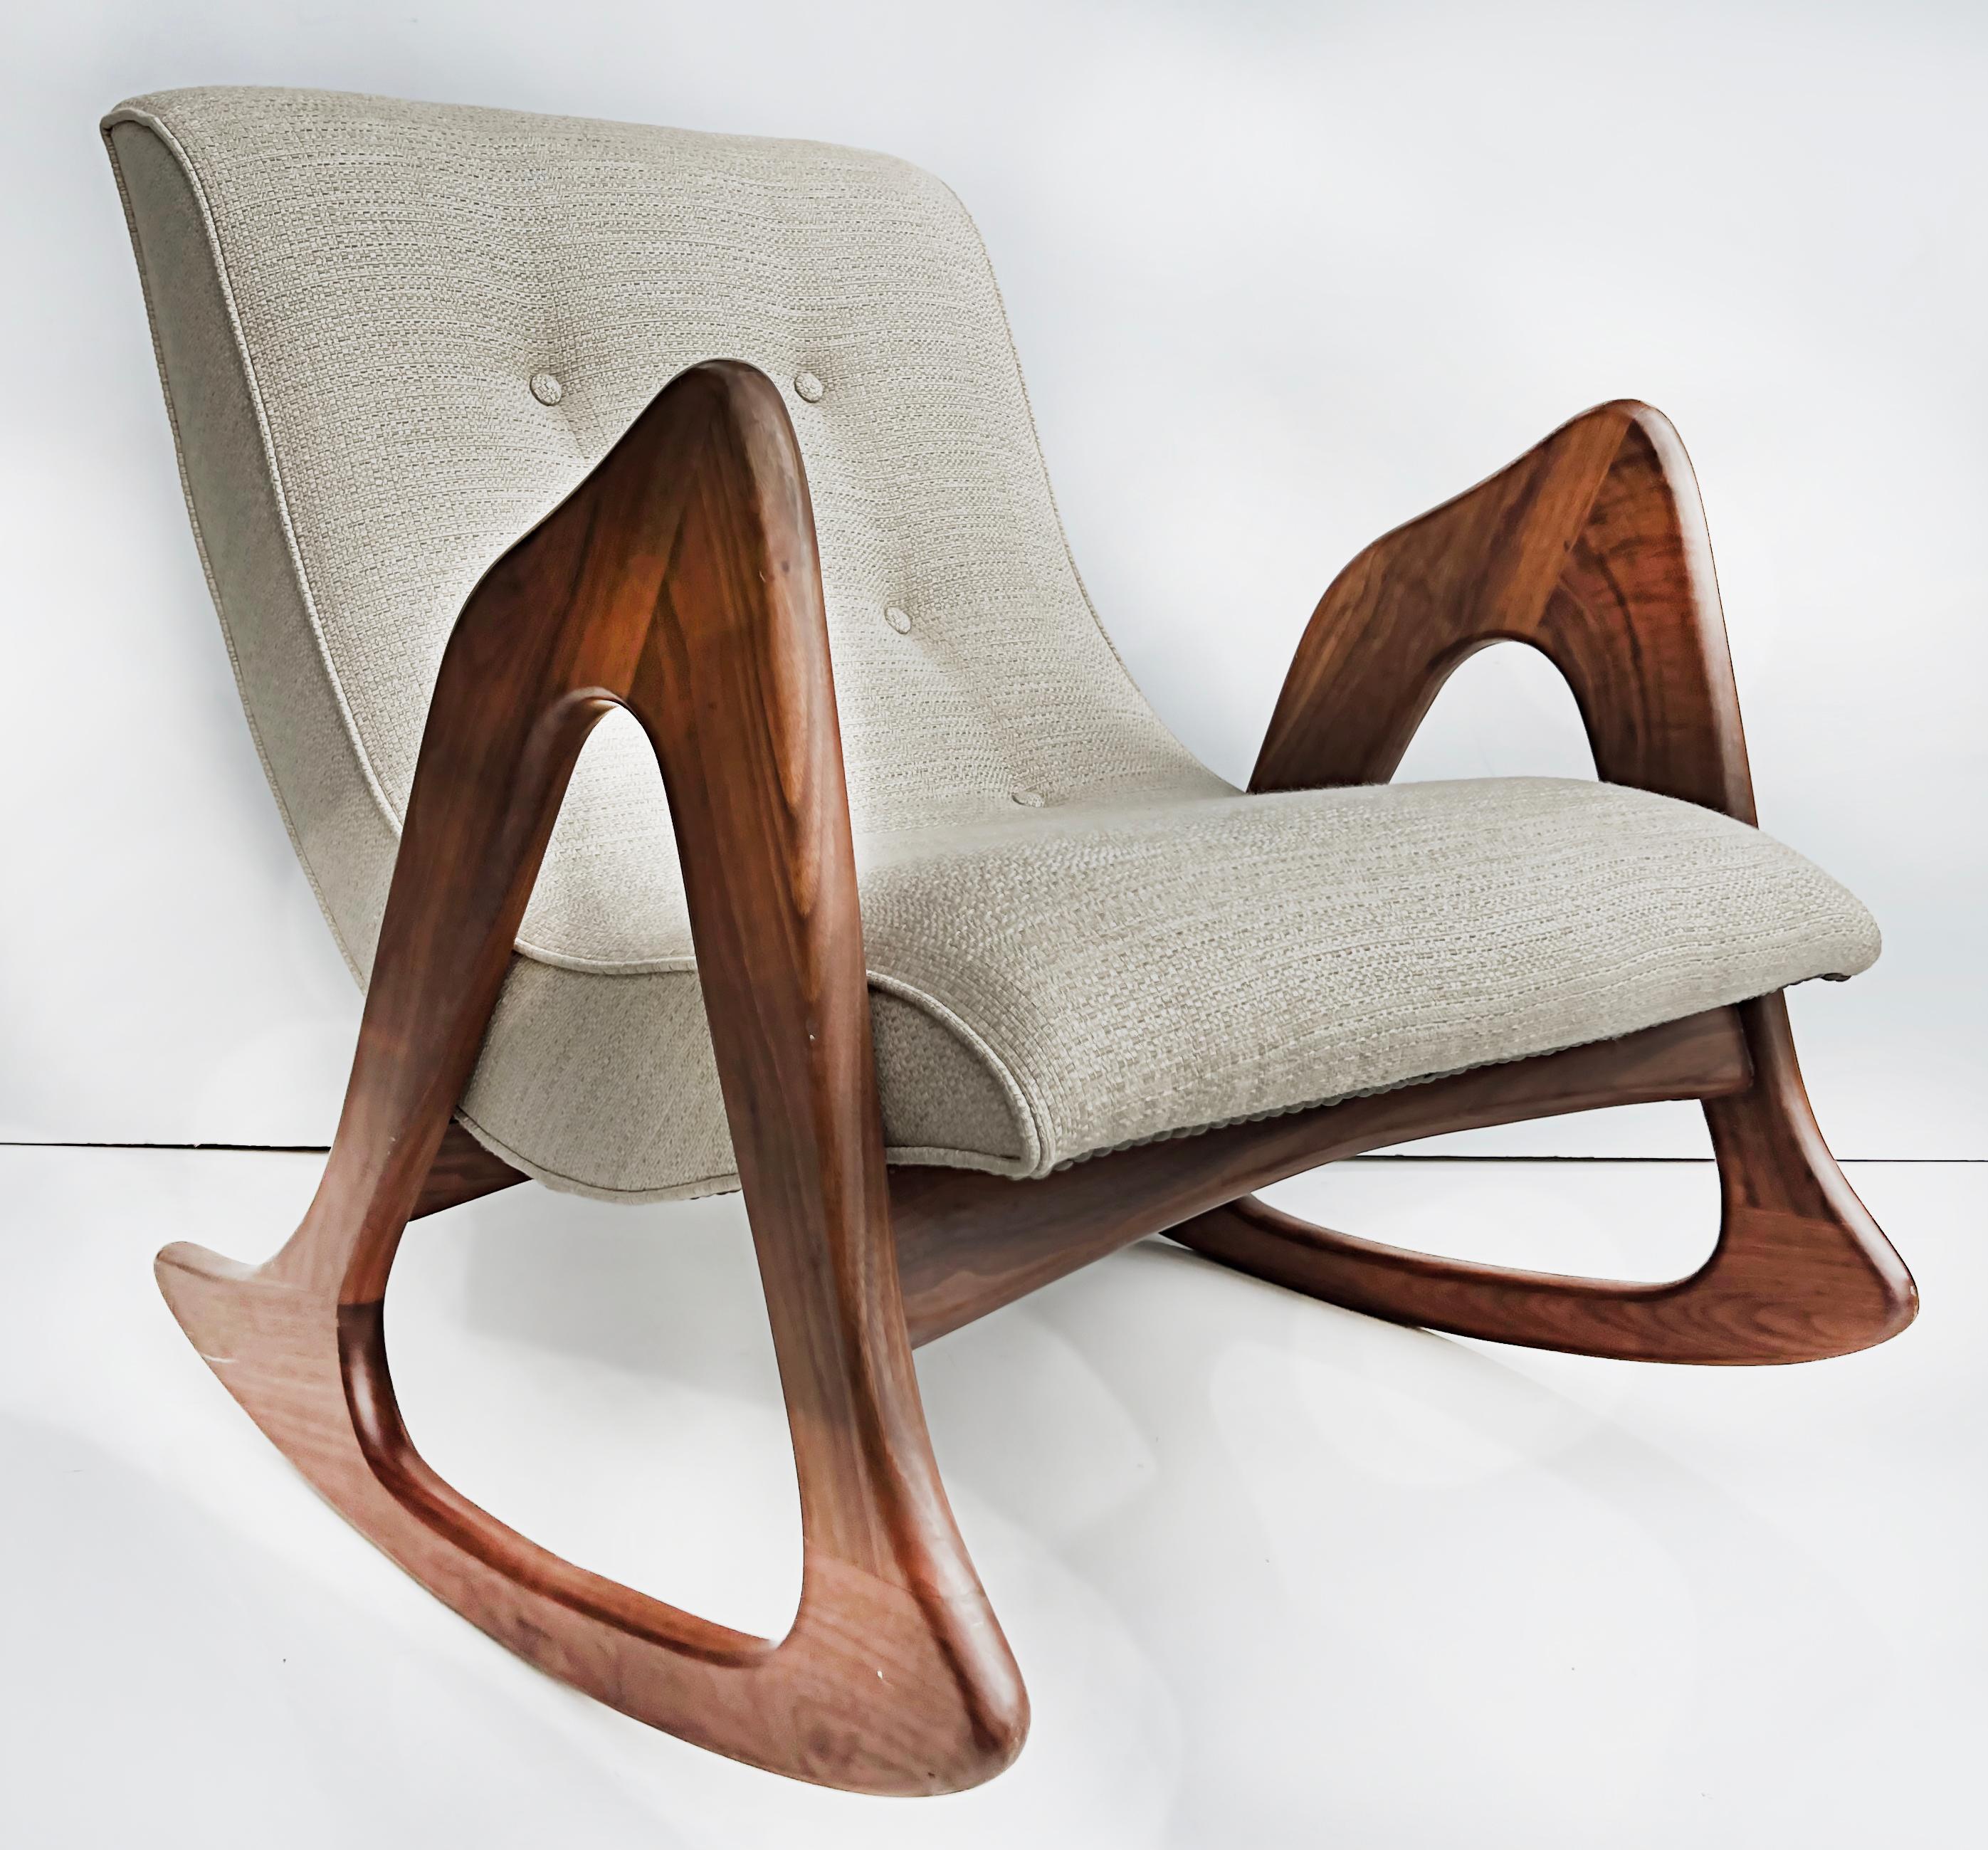 Midcentury Adrian Pearsall walnut rocking chair, Craft Associates

Offered for sale is a midcentury Adrian Pearsall rocking chair for Craft Associates. This rare walnut rocking chair has been completely redone to best feature its sculptural